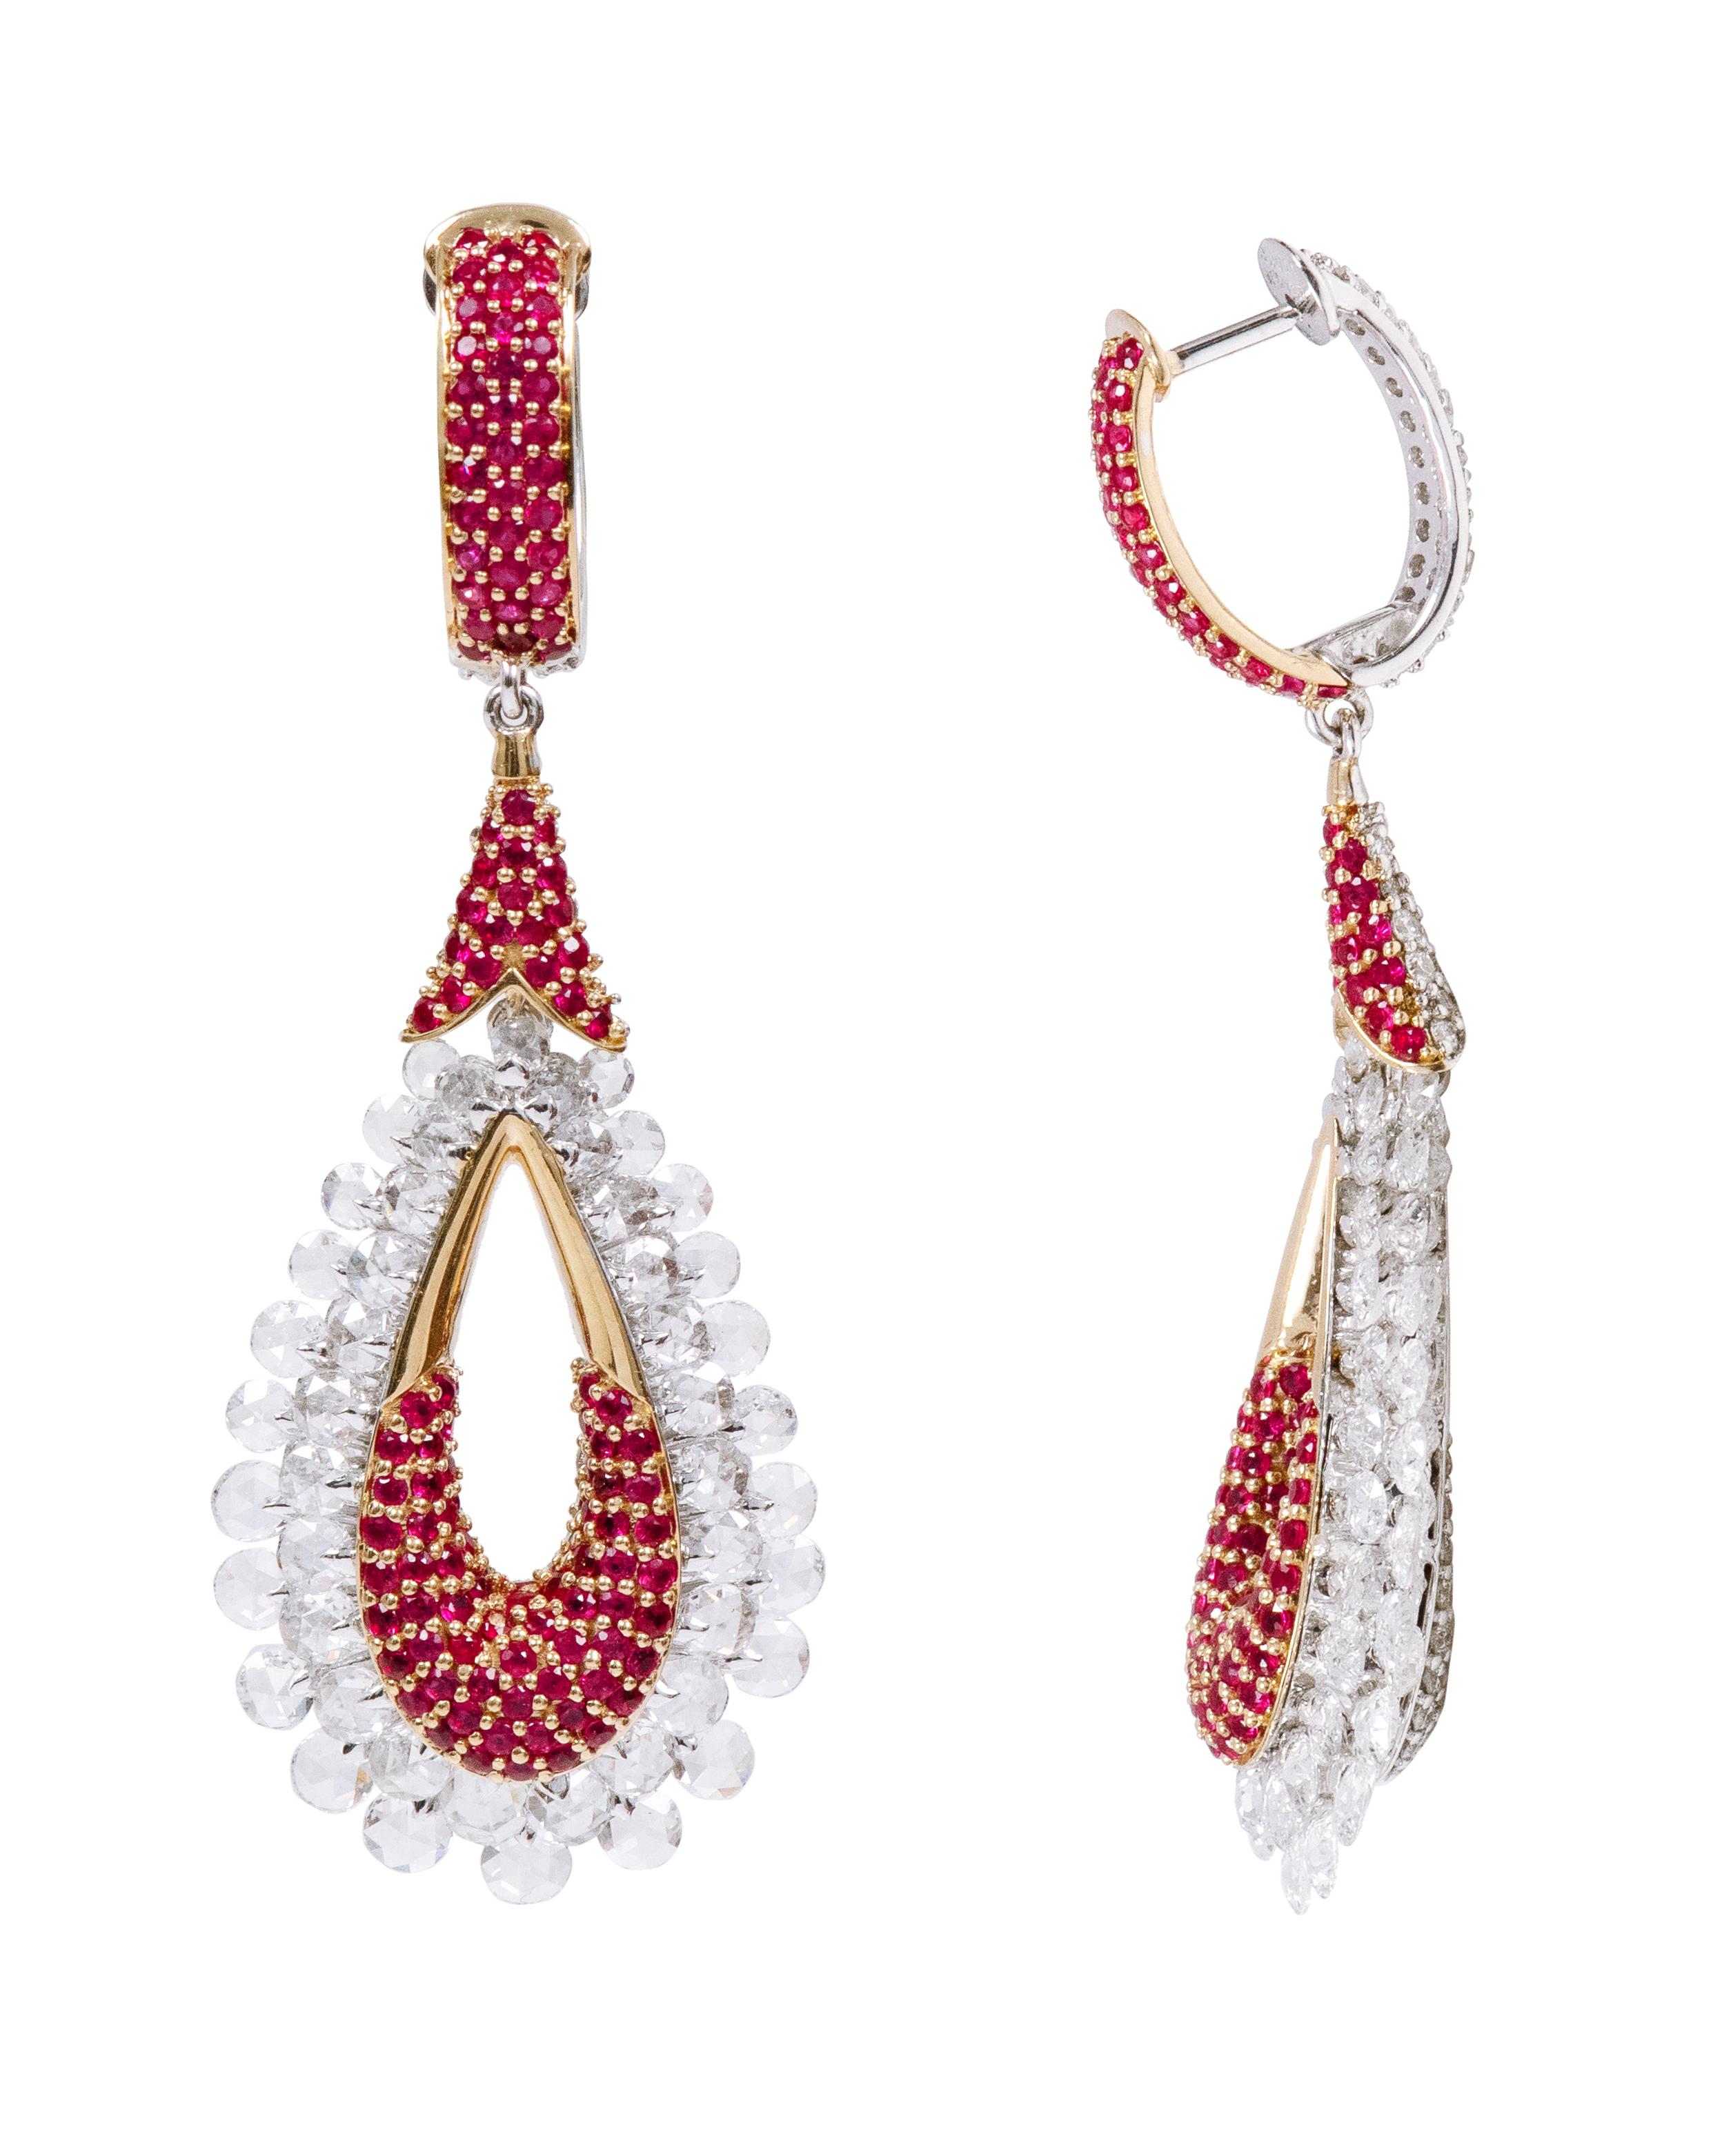 18 Karat Gold 8.51 Carats Diamond and Ruby Reversible Cocktail Earrings For Sale 1